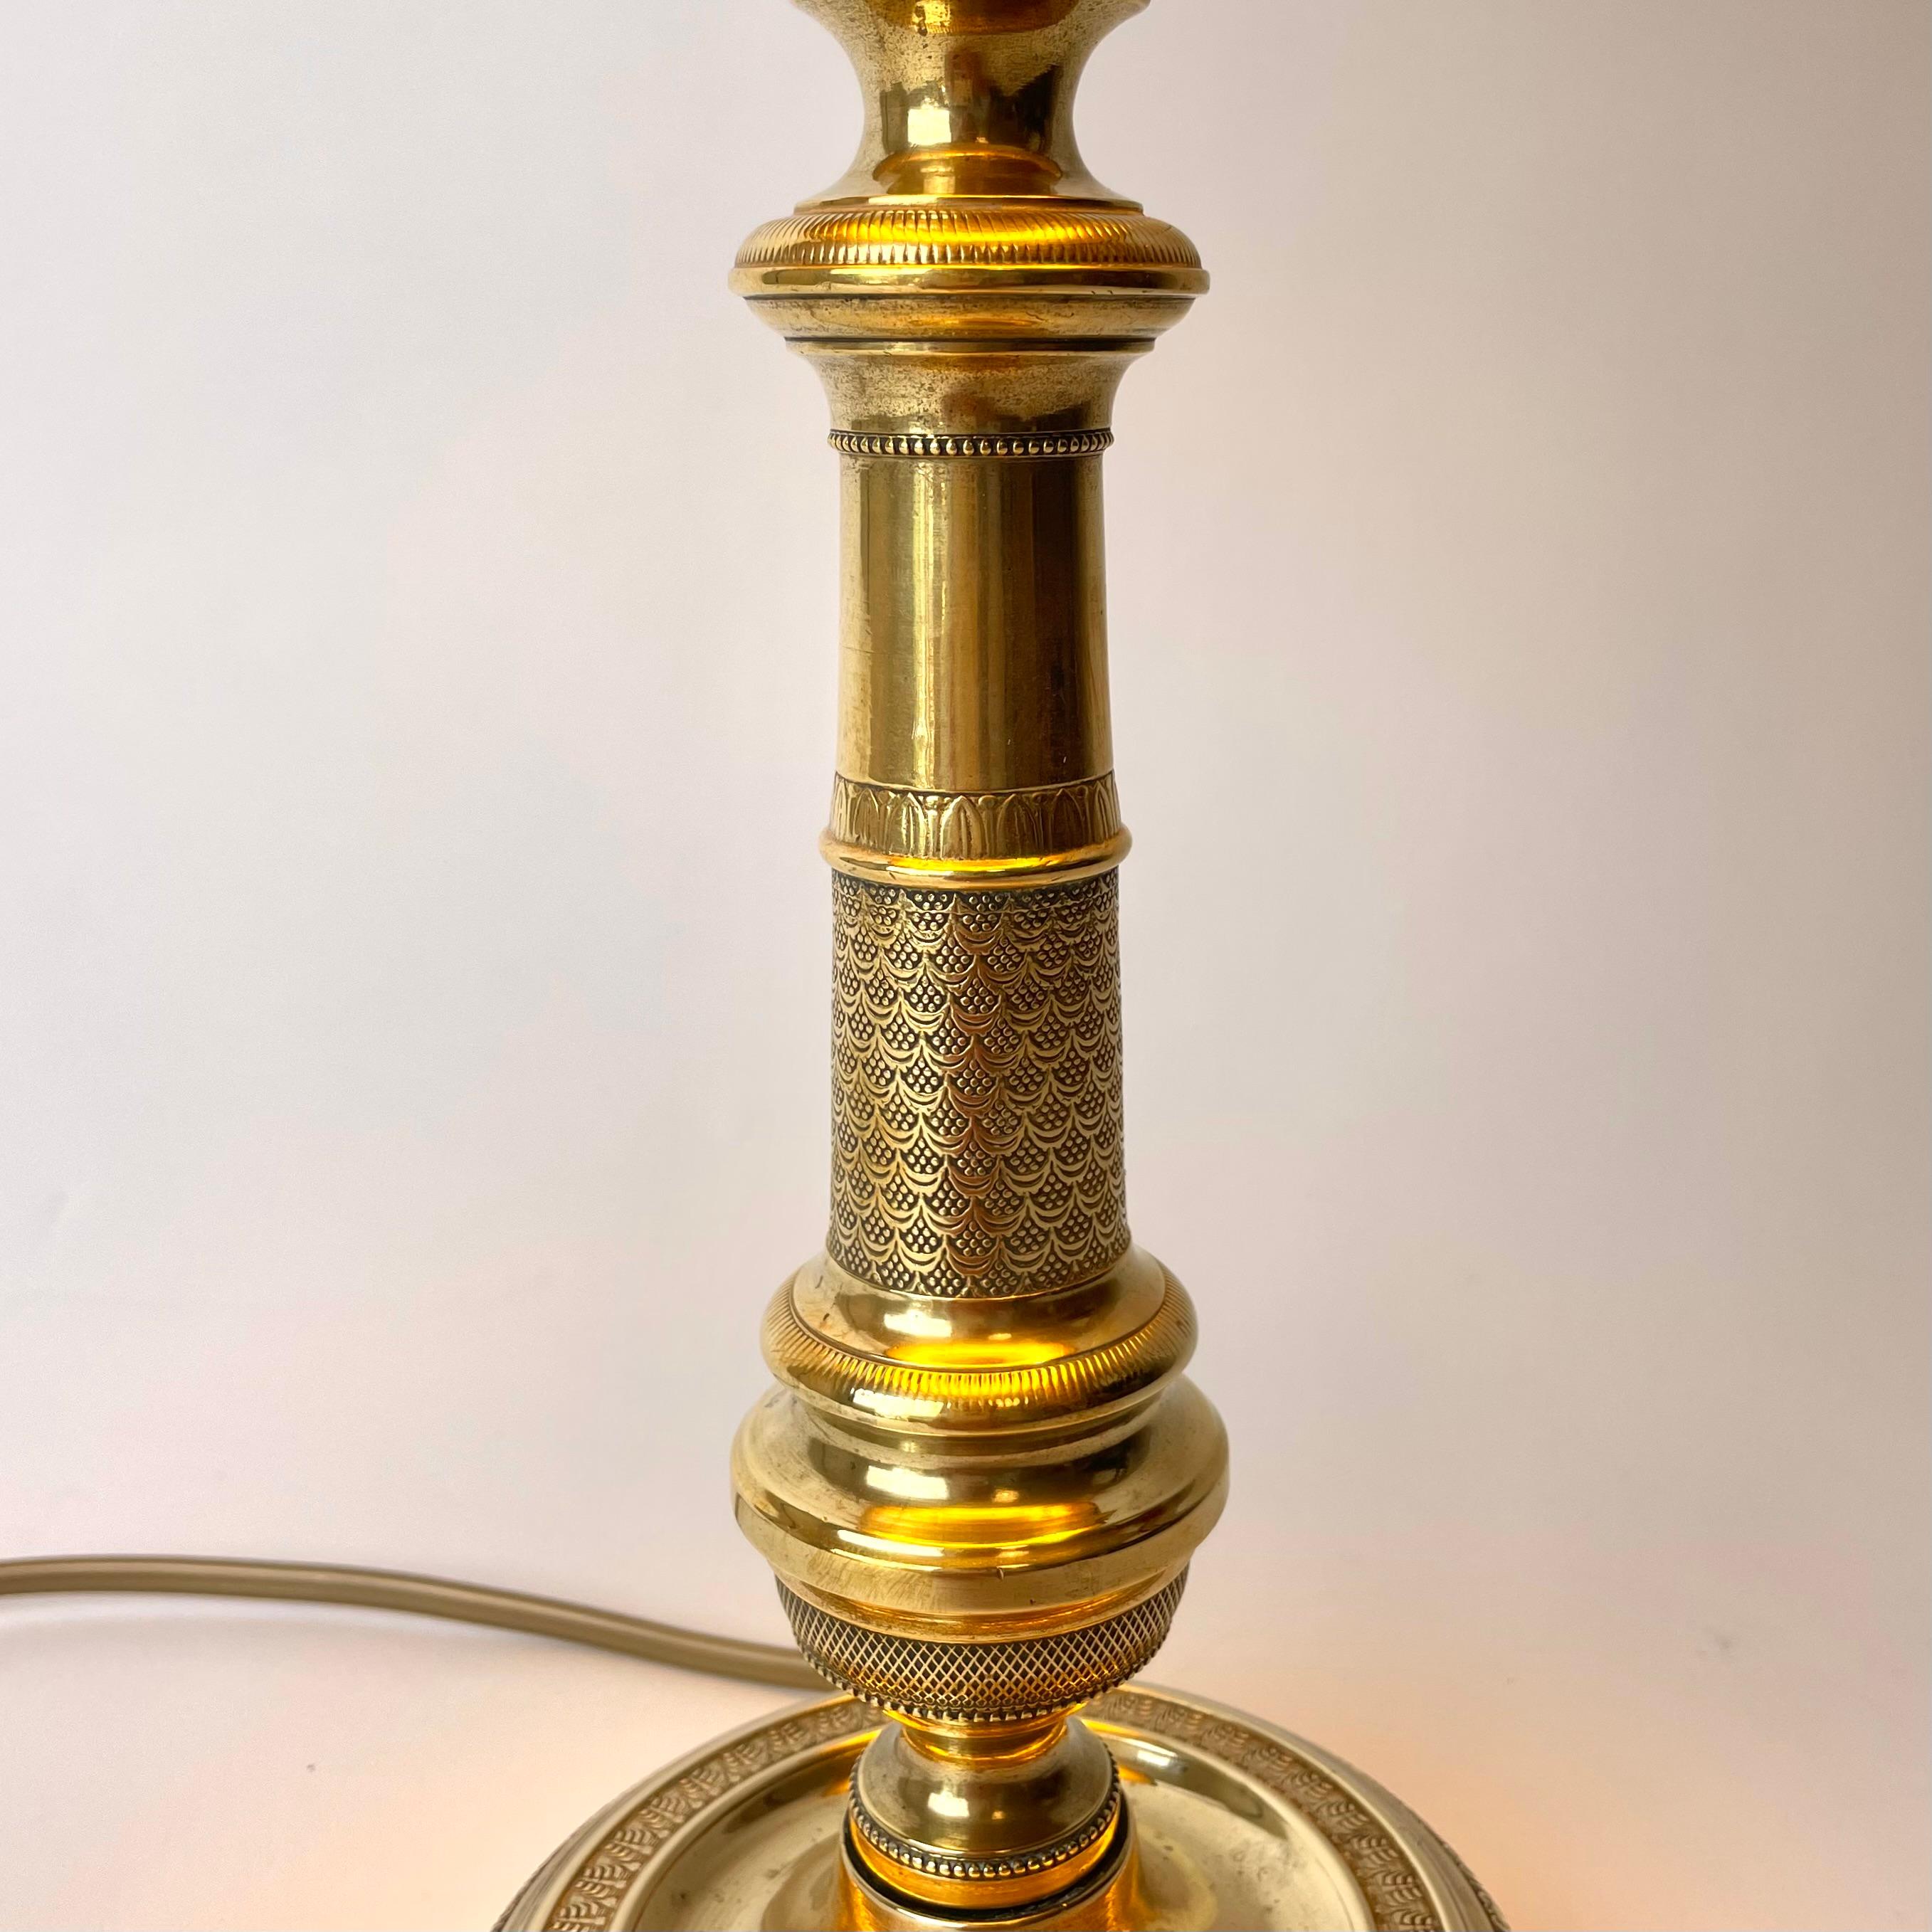 Early 19th Century Elegant Table Lamp in Brass, 1820s French Empire, Originally Candlestick